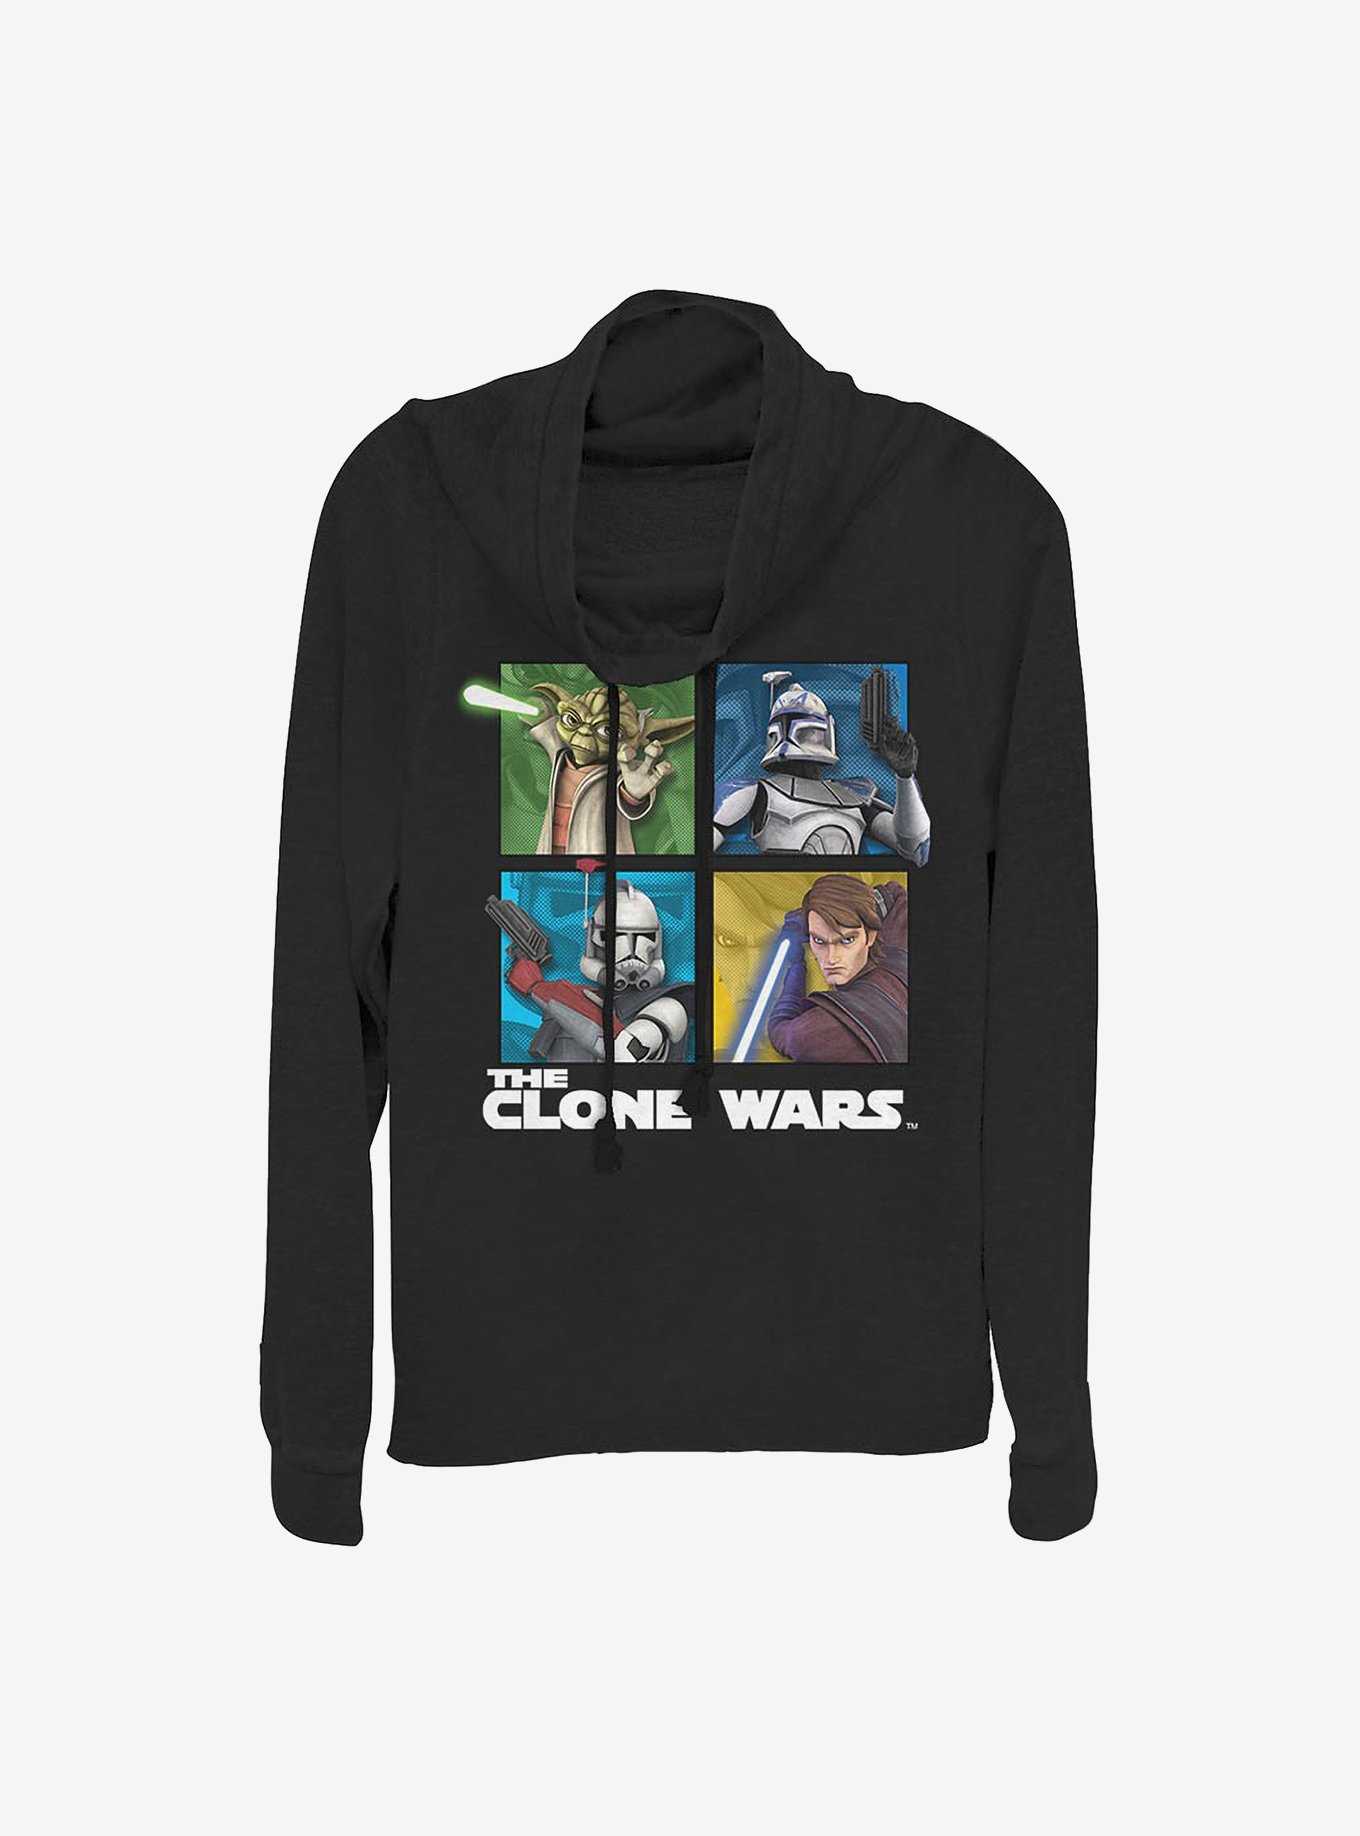 Star Wars: The Clone Wars Panel Four Cowlneck Long-Sleeve Girls Top, , hi-res